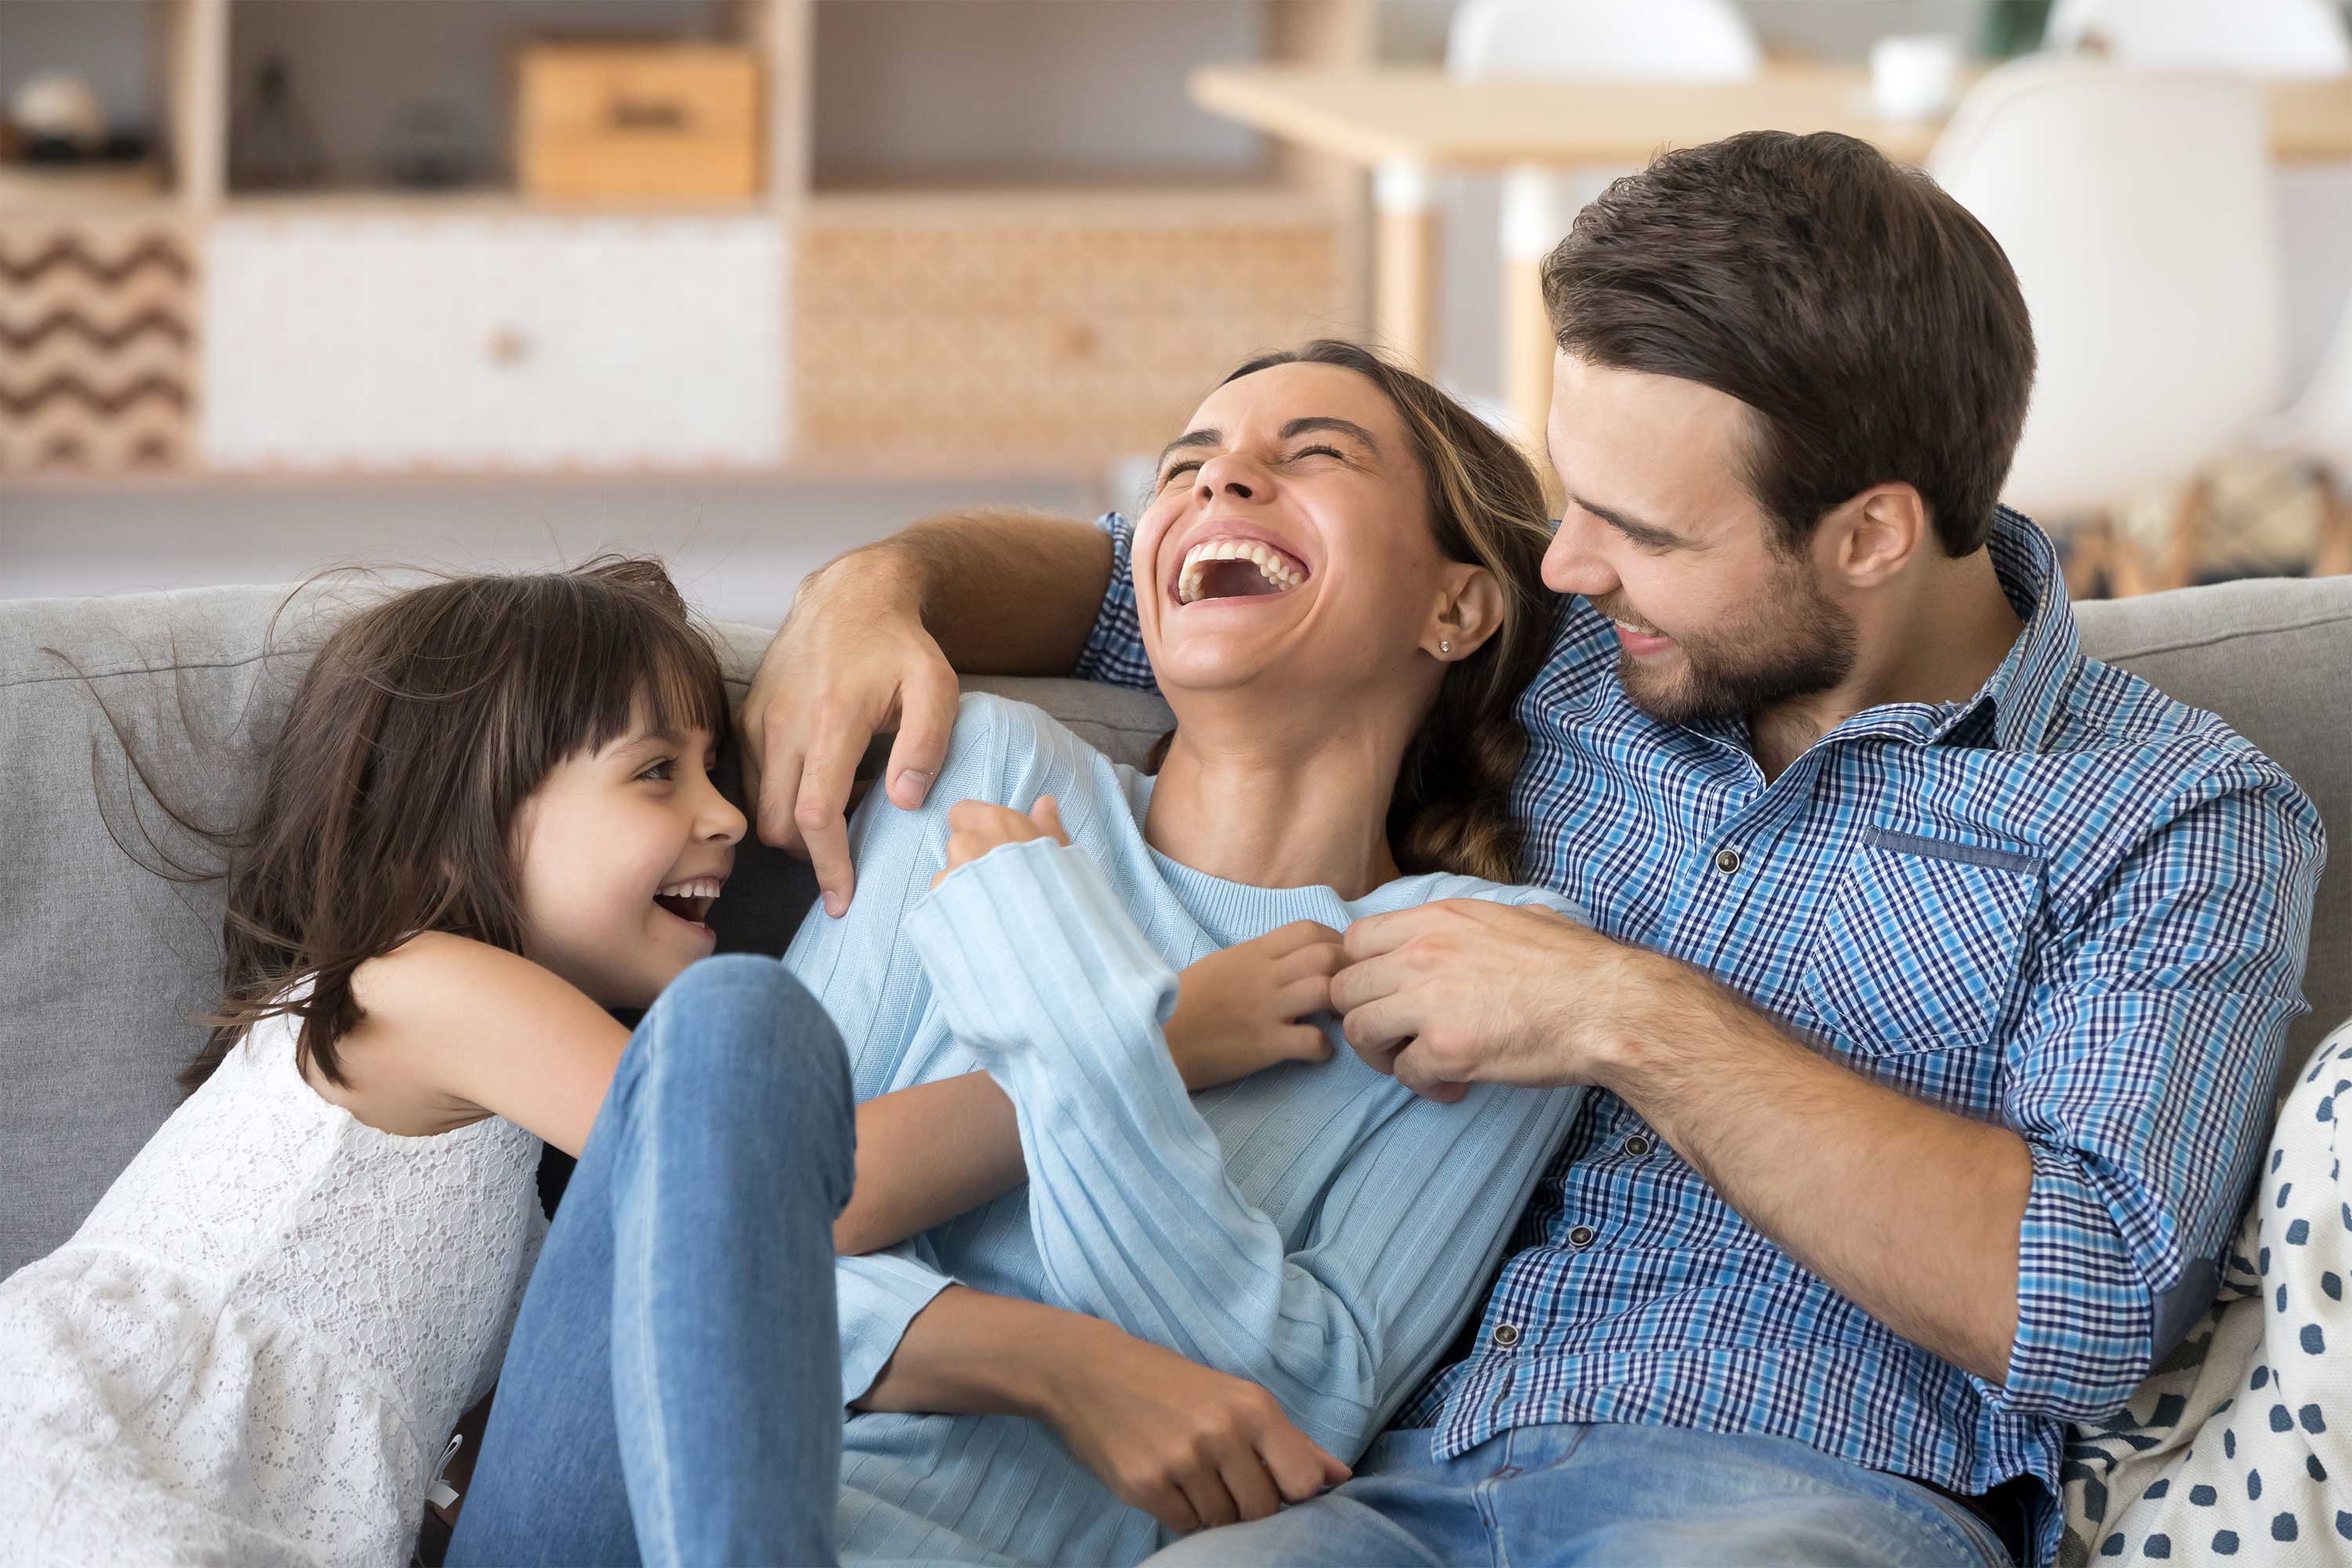 Mother and father sharing a laugh with their daughter on a couch